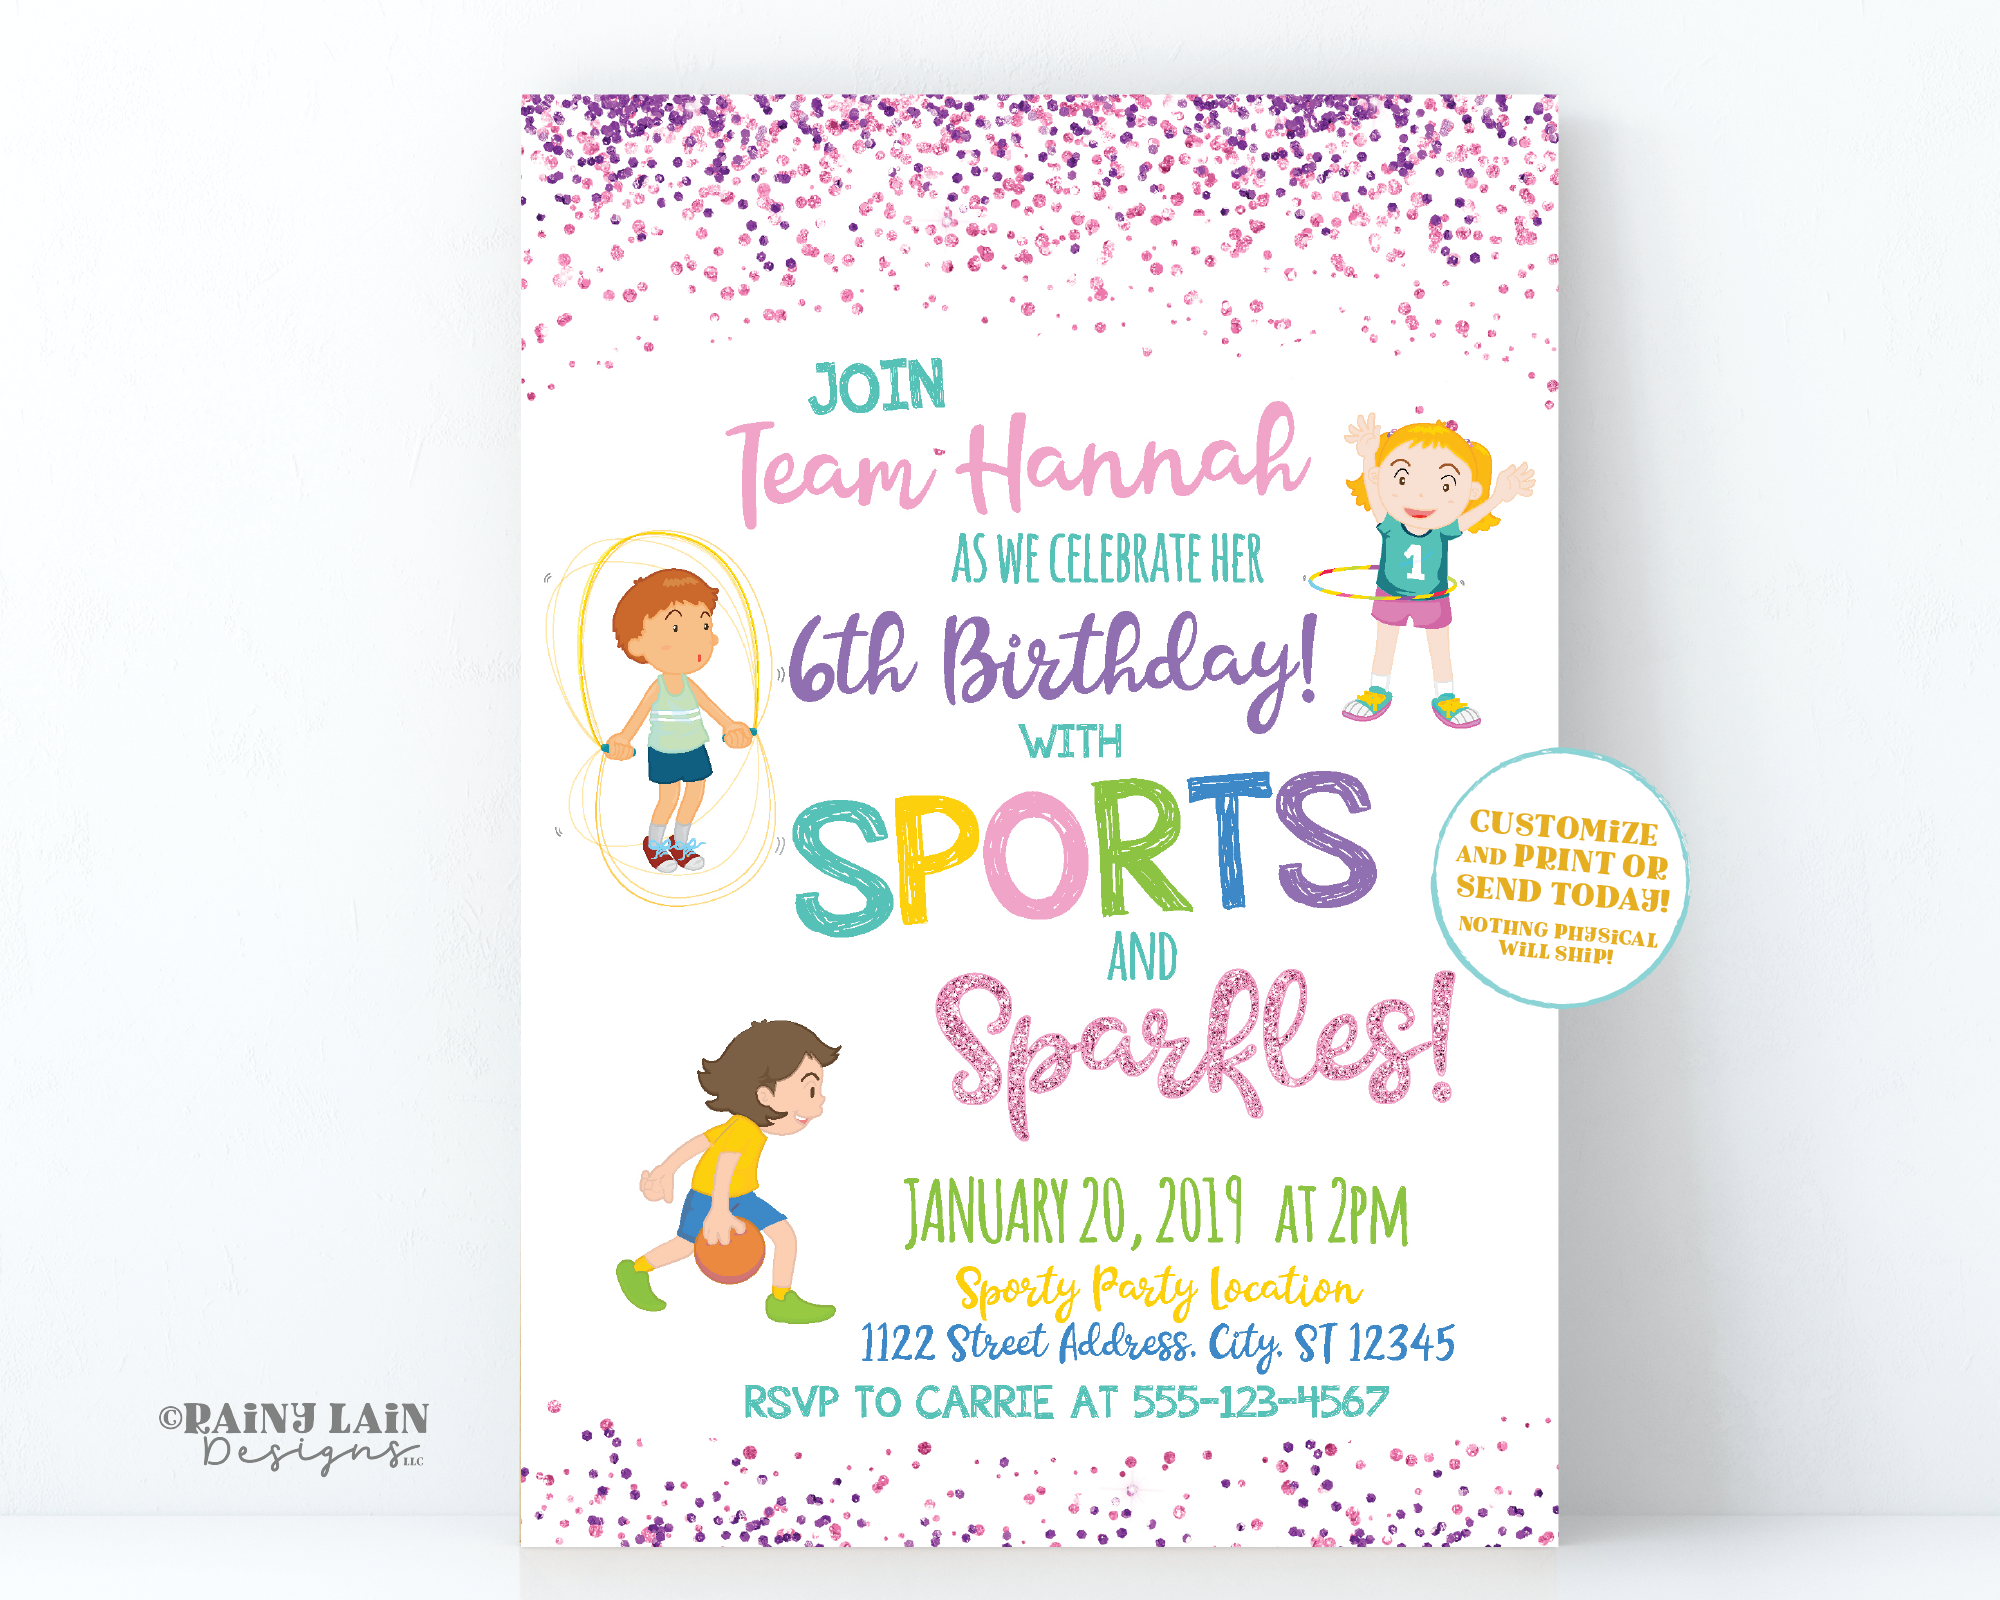 Sports and Sparkles Invitation, Girl Sports Party Invite, Sport Party Girl, Hoola Hoop Jump Rope, Basketball, Sports Invite, Sparkles Invite